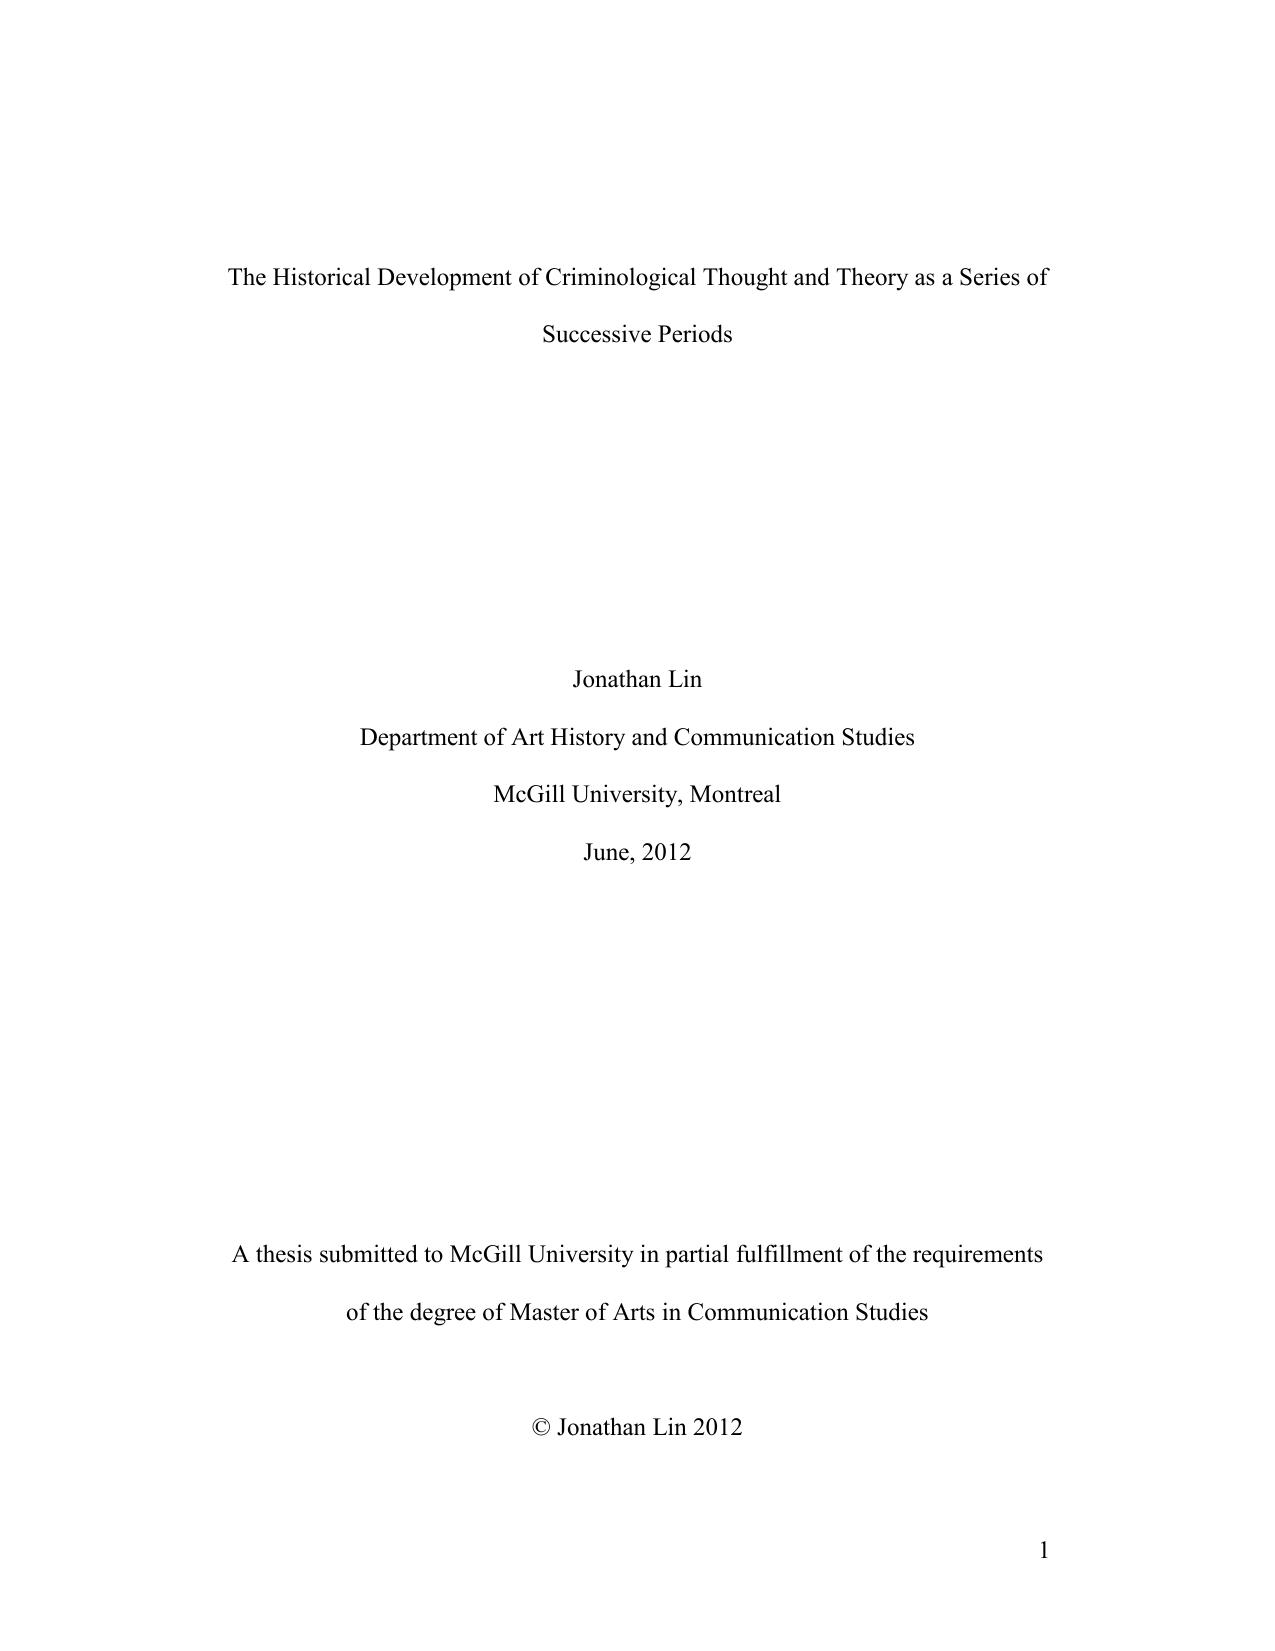 The historical development of criminological thought 2012